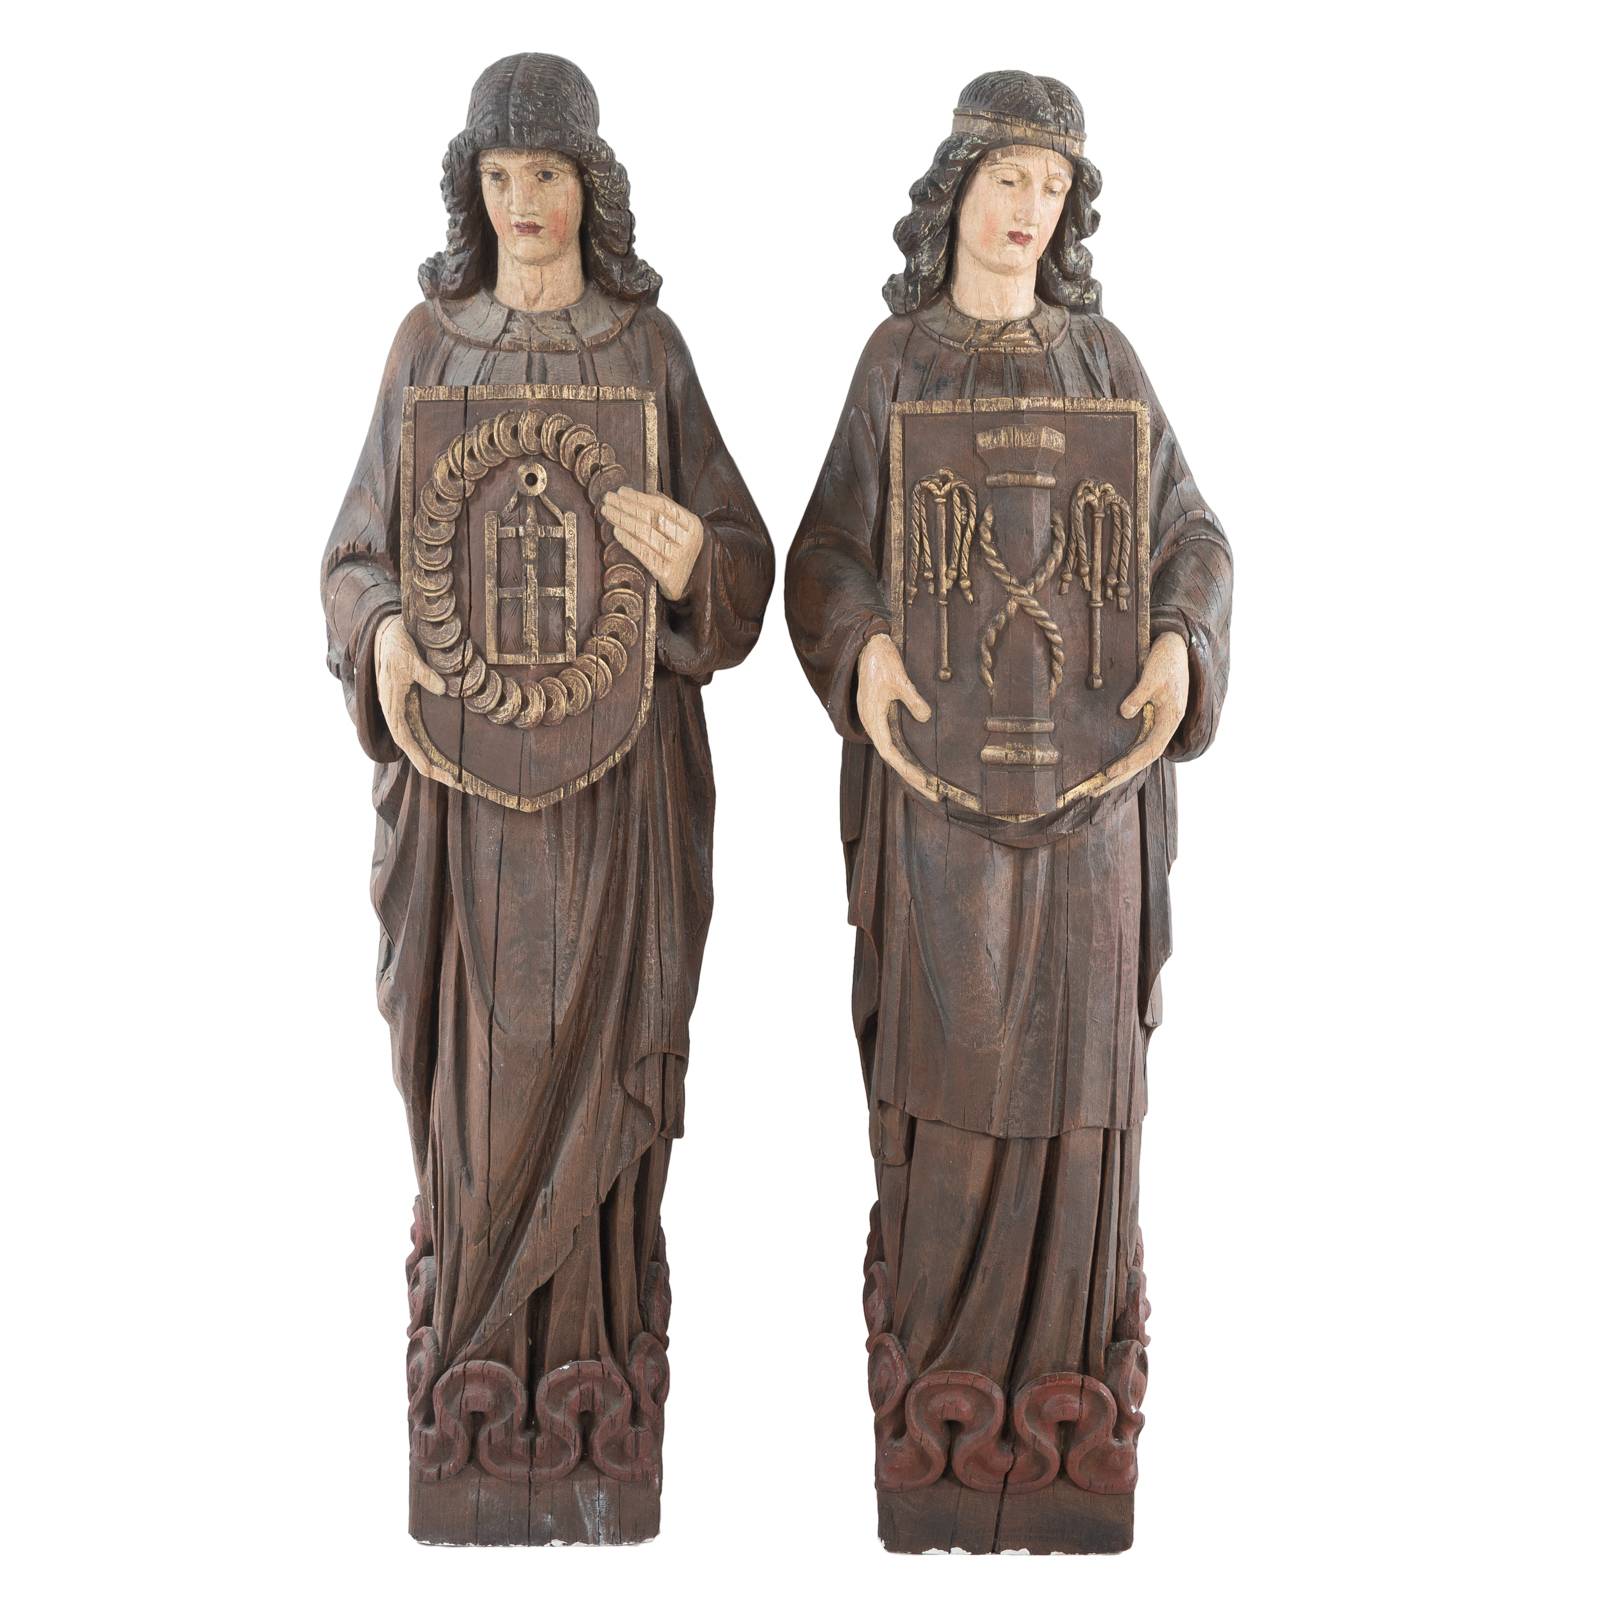 A PAIR OF CARVED WOOD SAINT FIGURES